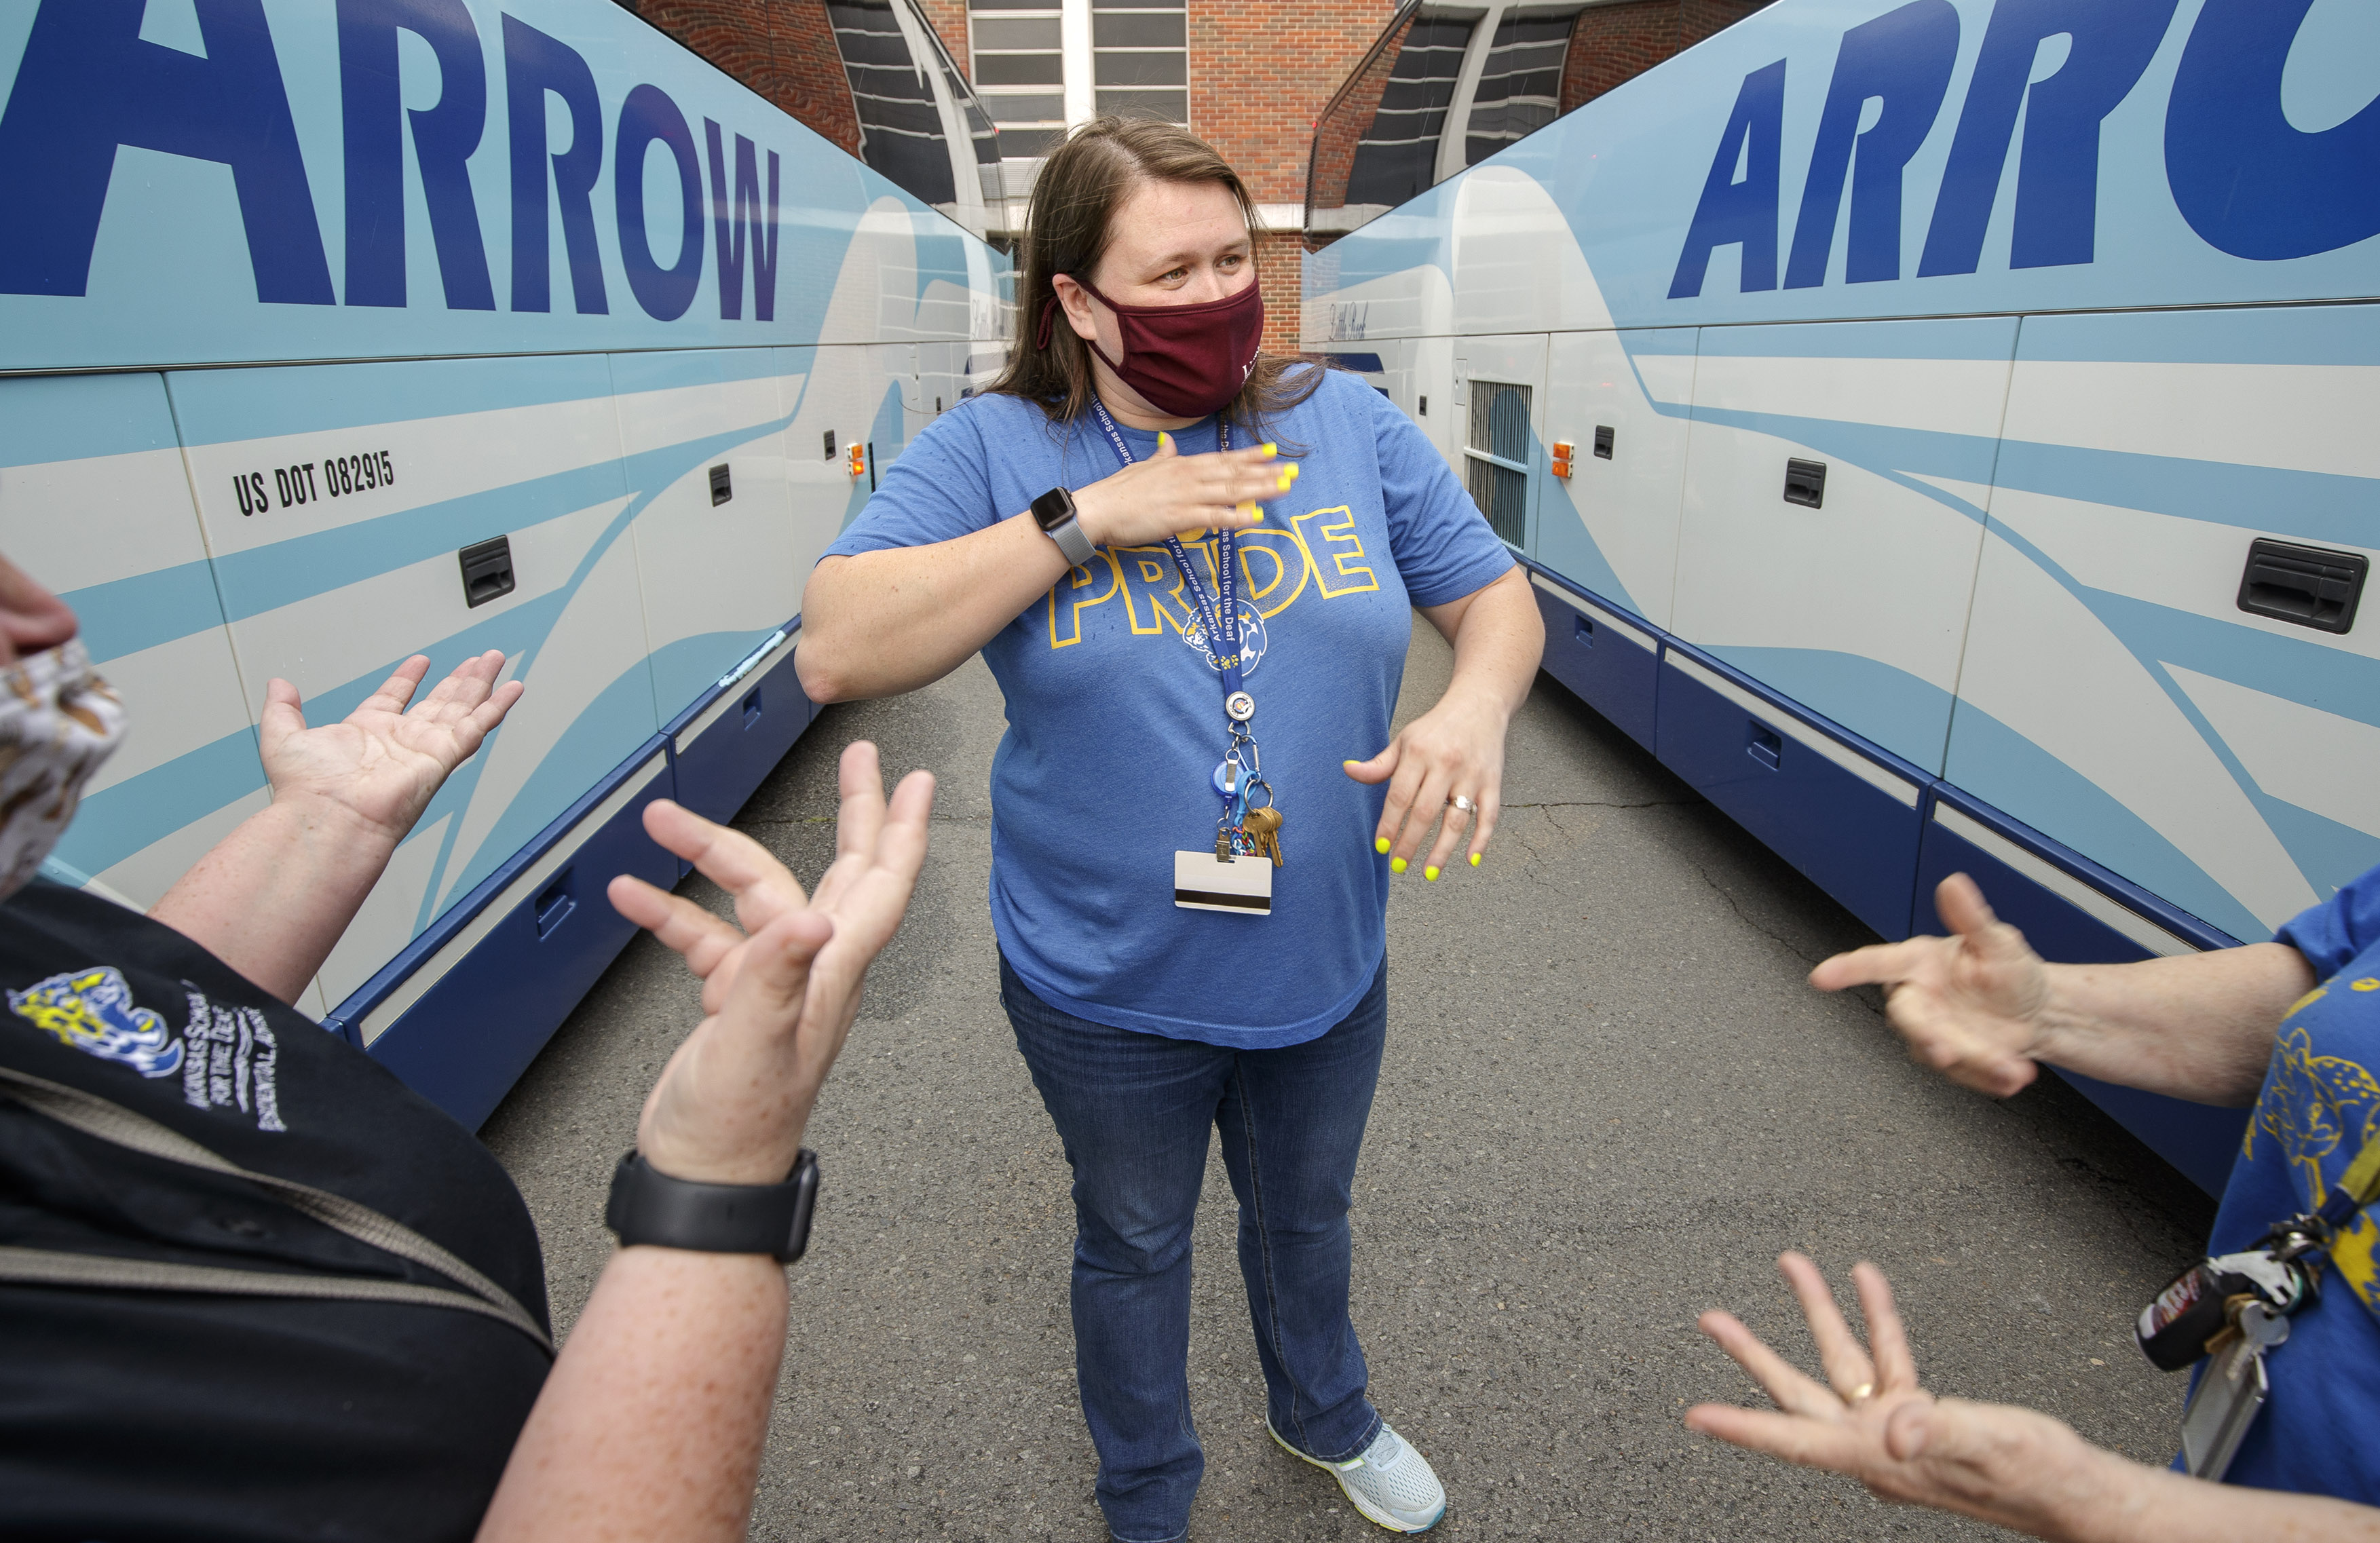 Jennifer Blanks communicates in sign language to other staff members at the Arkansas School for the Deaf about boarding students onto buses before the school’s weekend dismissal. Photo by Ben Krain.